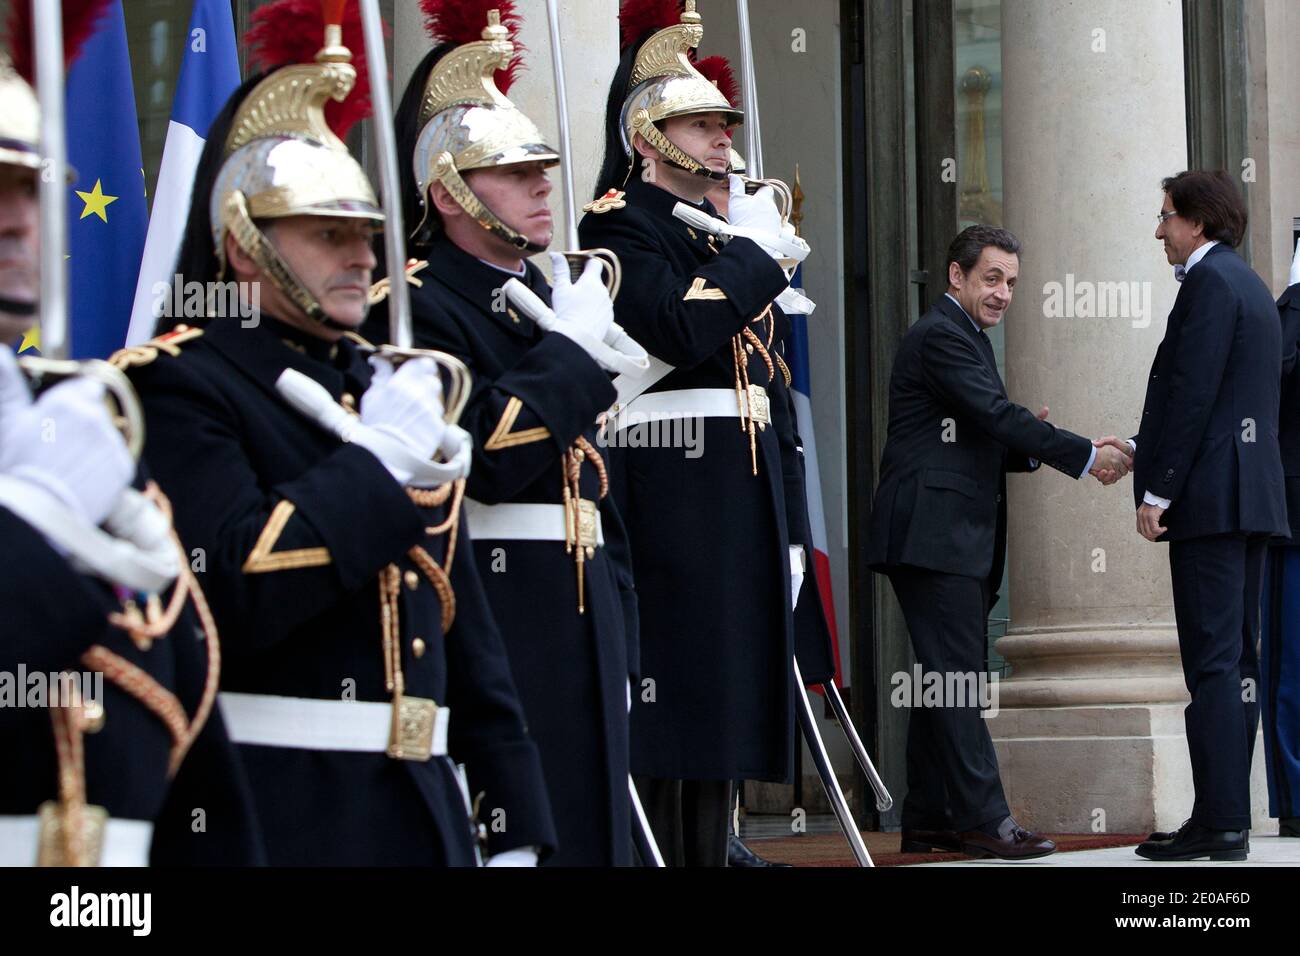 French President Nicolas Sarkozy shakes hands with Belgium Prime Minister Elio Di Rupo prior to a meeting at the Elysee Palace, in Paris, France on February 24, 2012. Photo by Stephane Lemouton/ABACAPRESS.COM. Stock Photo